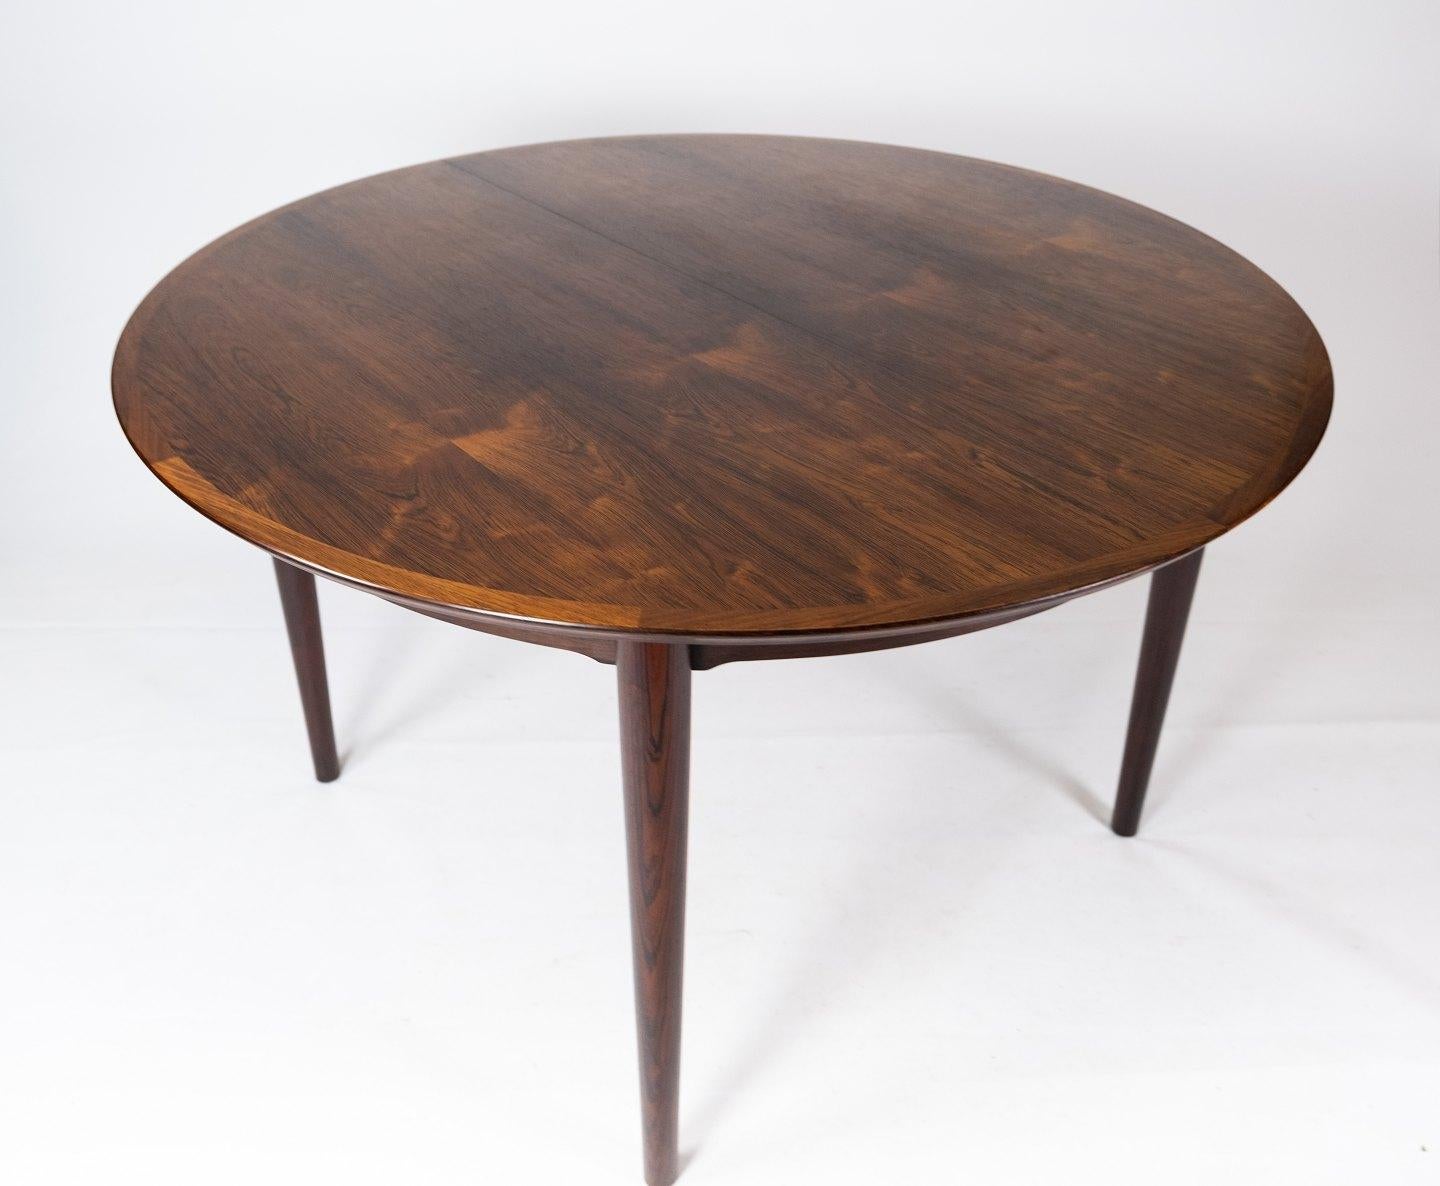 This rosewood dining table was designed by the renowned Danish furniture designer Arne Vodder and dates from the 1960s. The table is a beautiful example of the period elegance and craftsmanship that characterizes Vodder's design.

With its rich